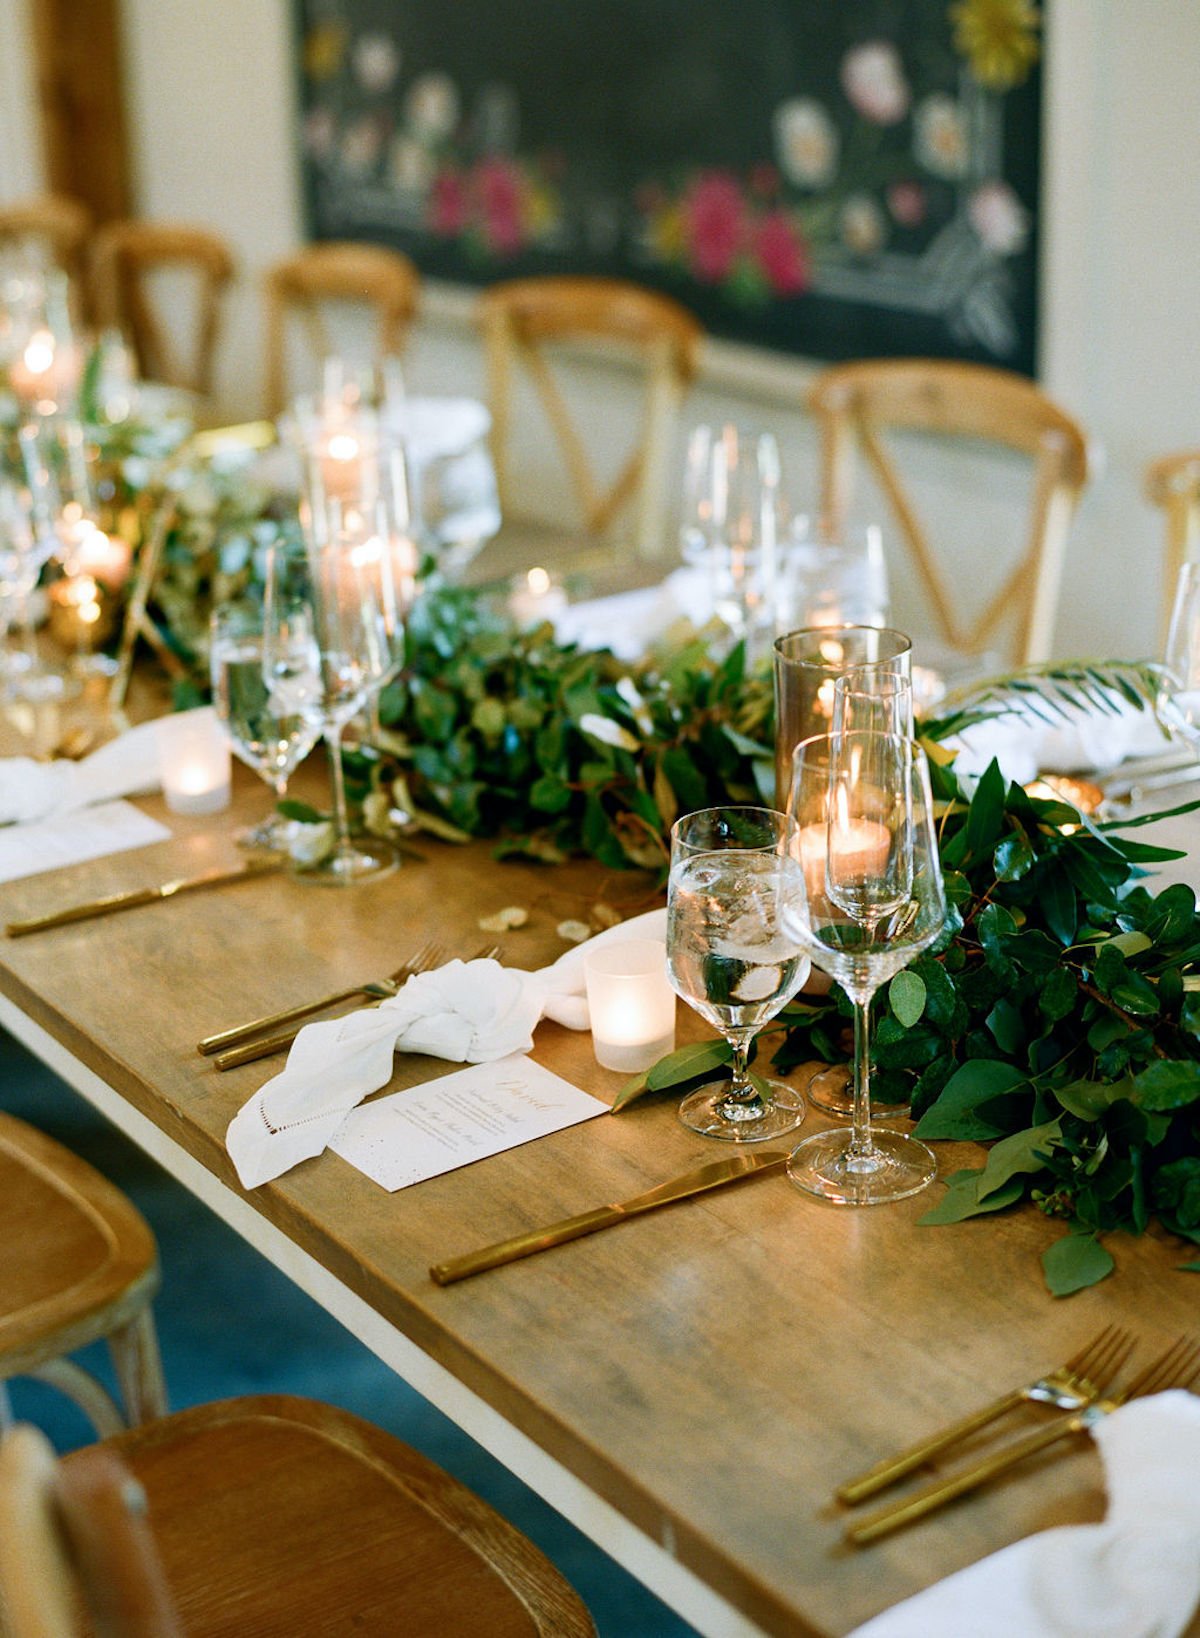 Close up of table place settings, glasses, and greenery